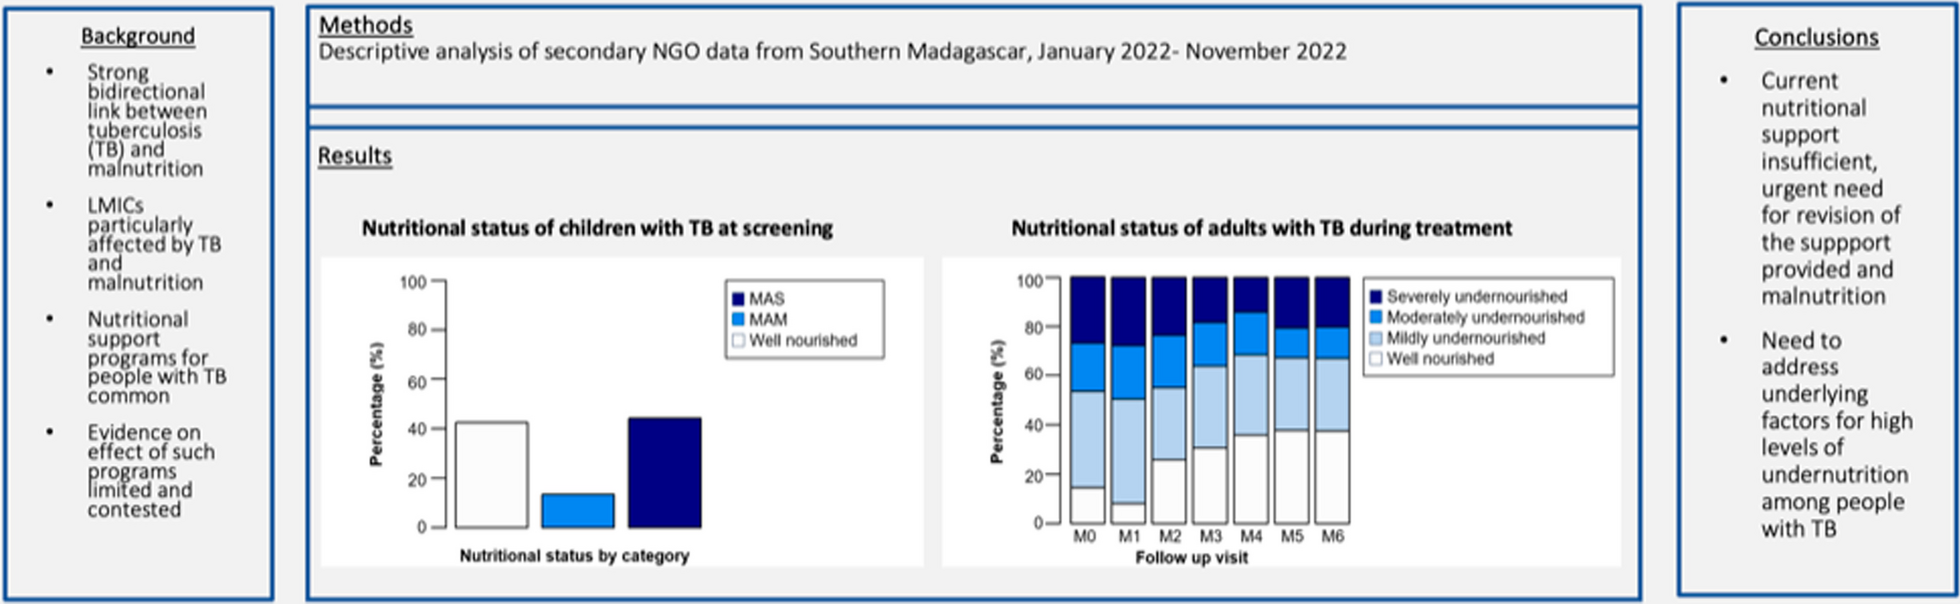 A cross-sectional analysis of the effectiveness of a nutritional support programme for people with tuberculosis in Southern Madagascar using secondary data from a non-governmental organisation